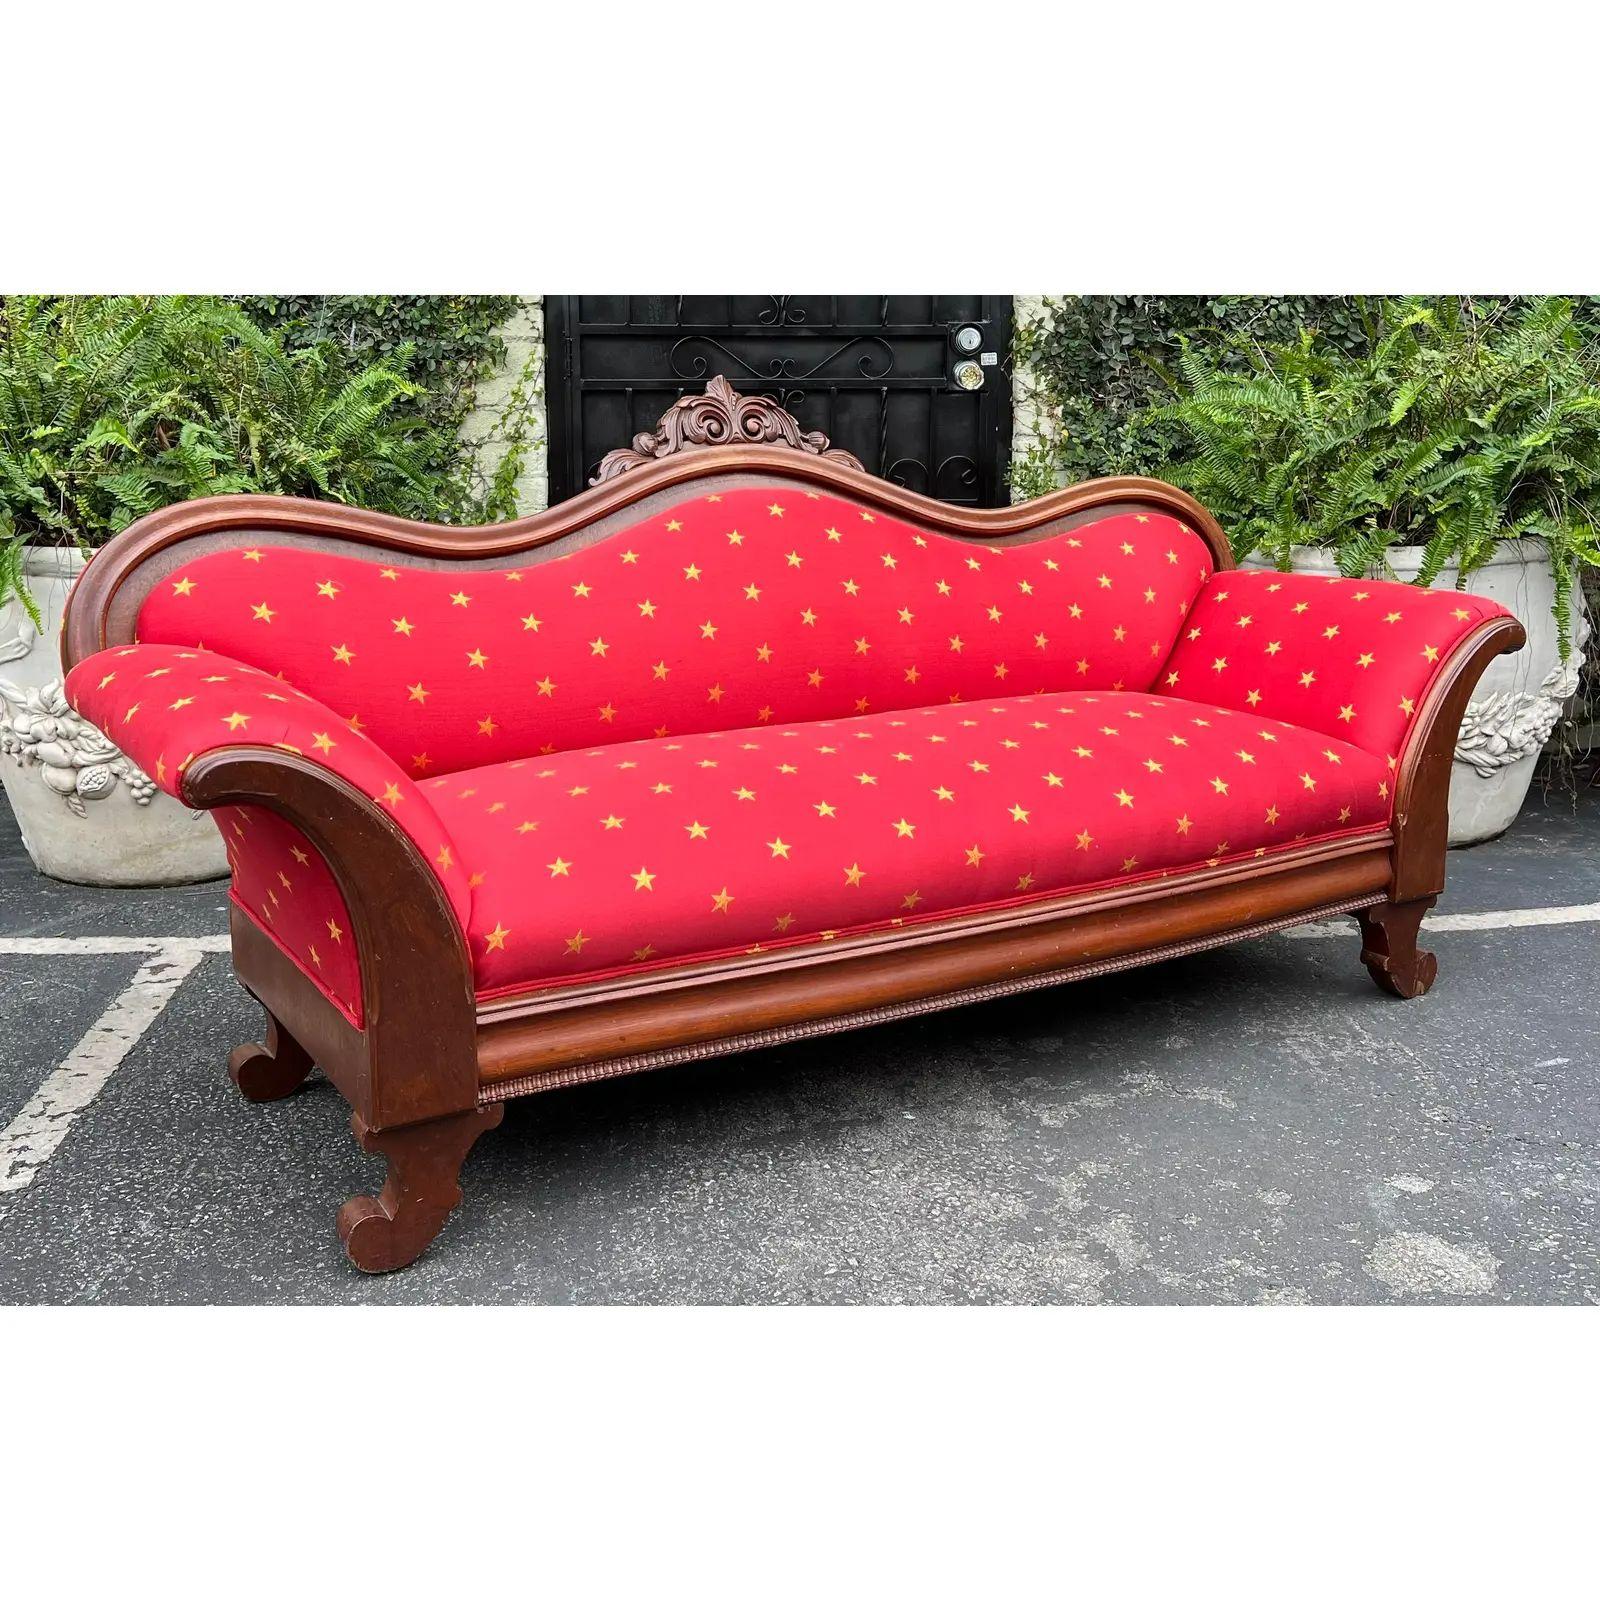 Antique Empire Sofa With Red & Gold Clarence House Fabric. It features an Empire form in solid mahogany and was freshly upholstered in gold star on red Clarence House fabric. 

Additional information: 
Materials: Fabric, Mahogany
Please note